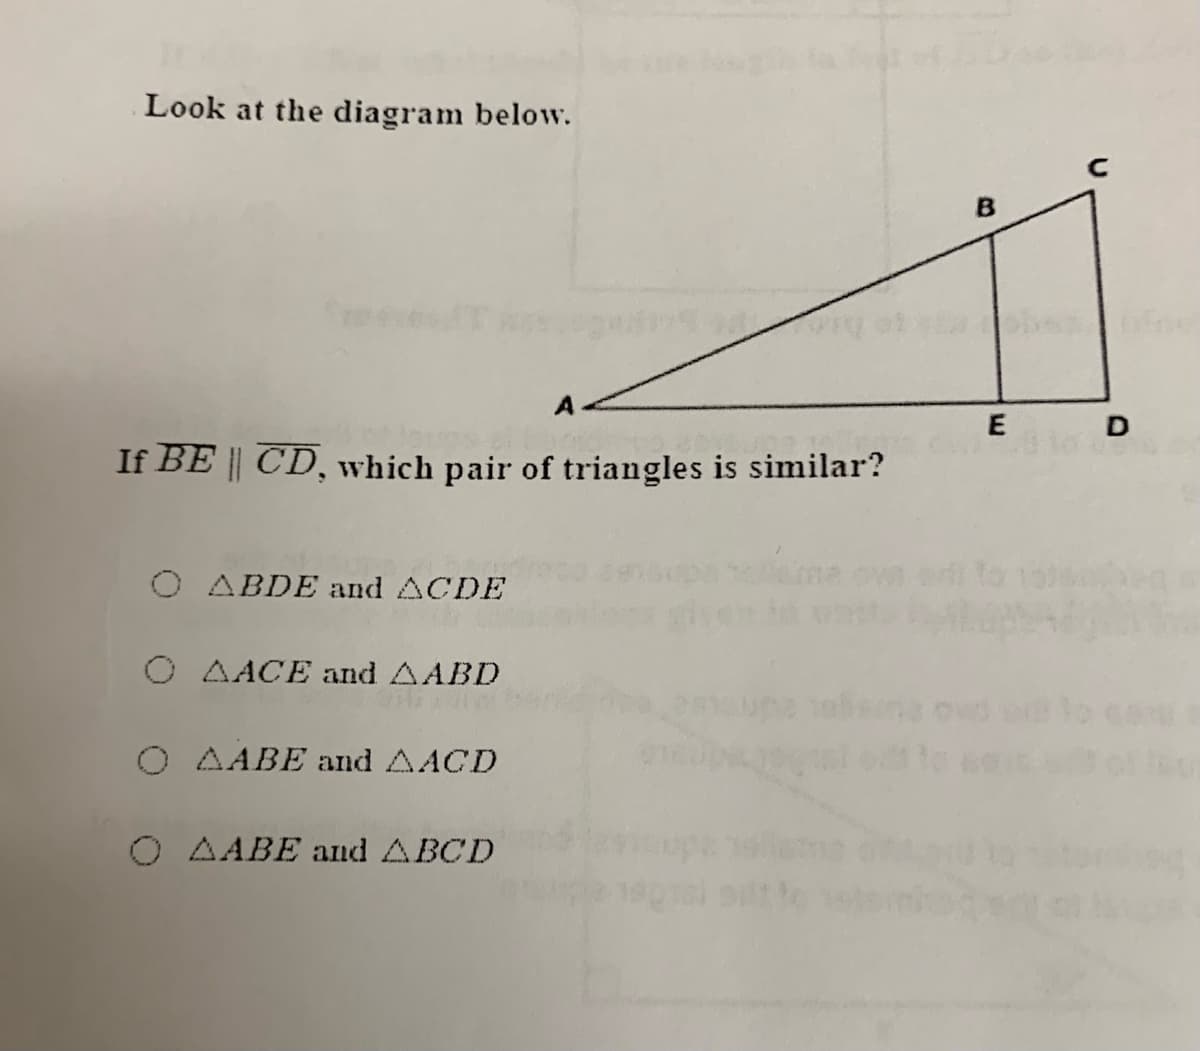 Look at the diagram below.
C
E
If BE || CD, which pair of triangles is similar?
O ABDE and ACDE
O AACE and AABD
O AABE and AACD
O AABE and ABCD
D.
